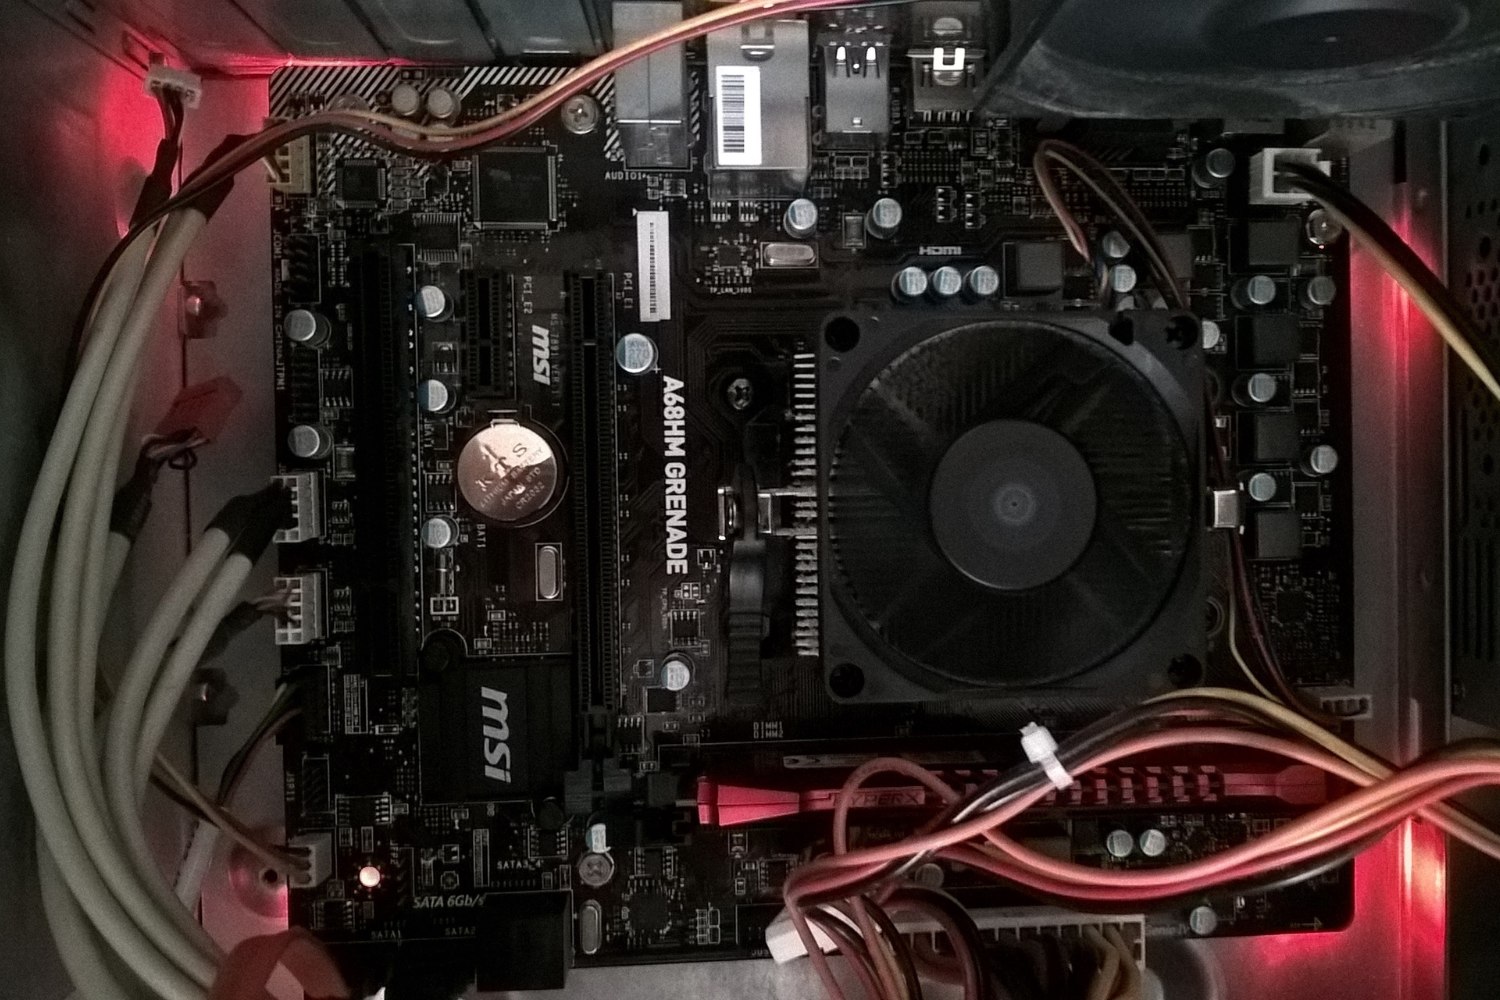 How To Install A CPU Cooler On A68Hm-Grenade Micro Atx